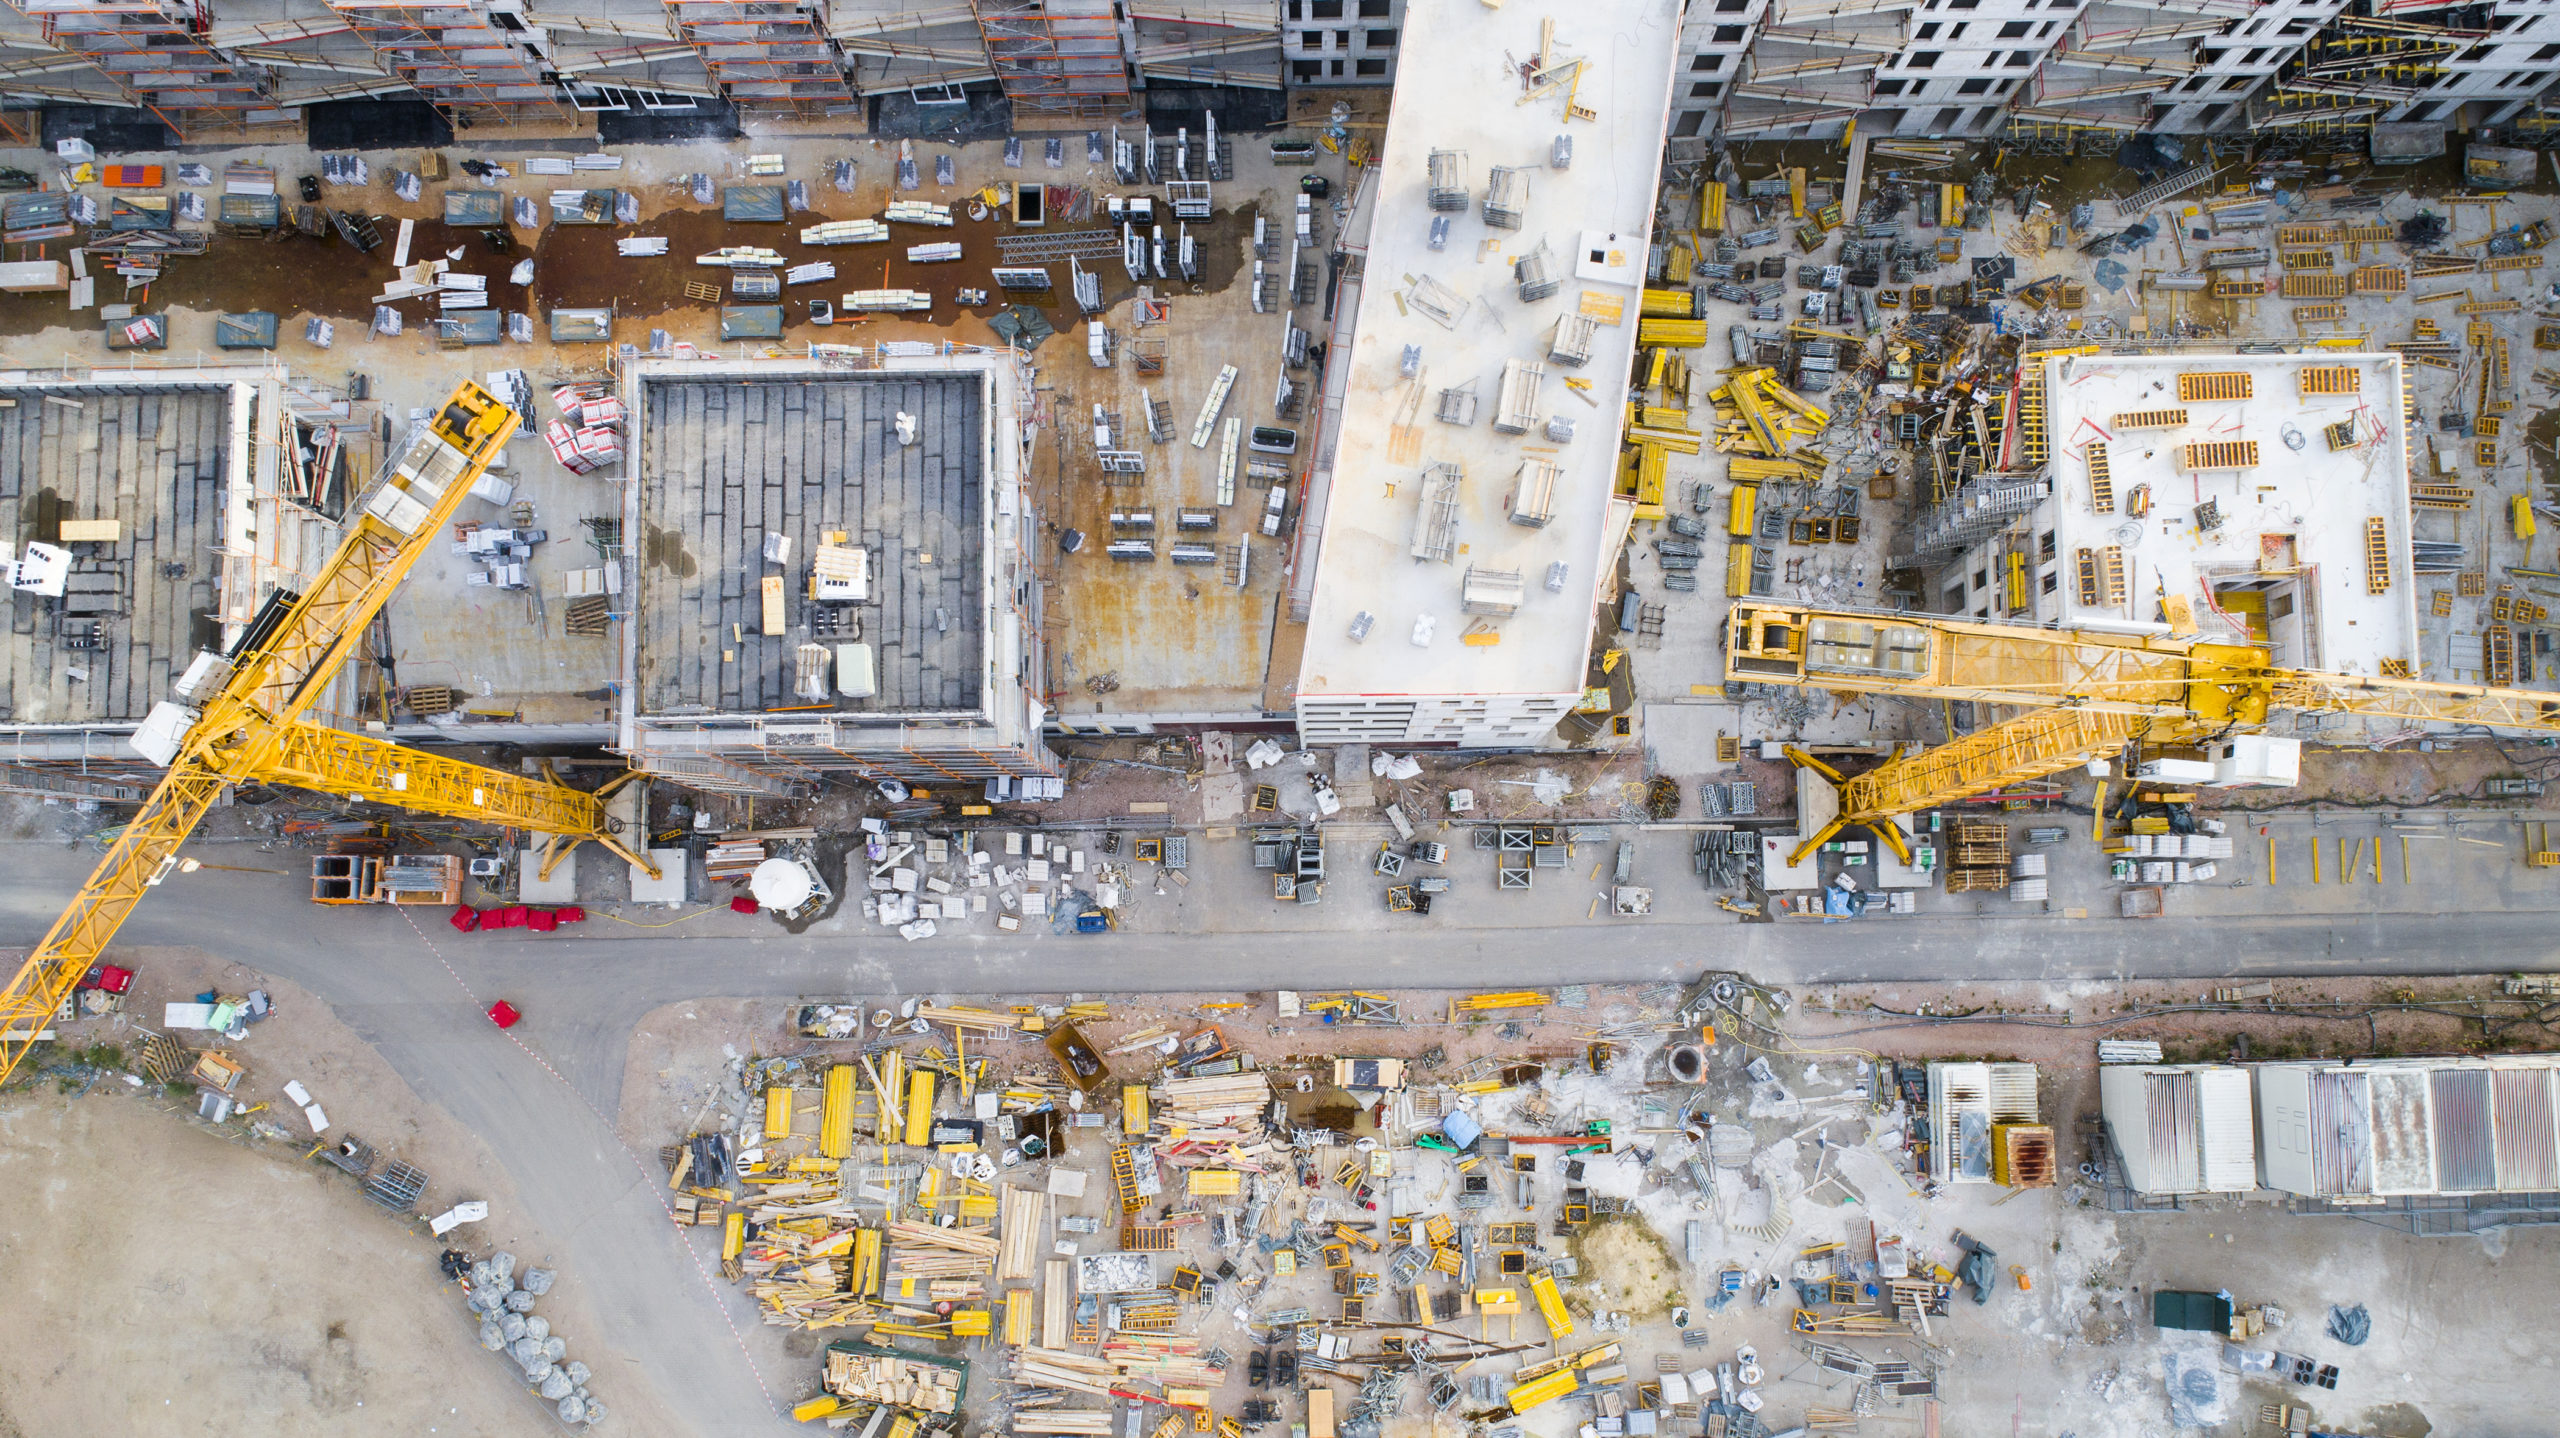 An aerial view of a construction worksite shows two yellow cranes among a sea of buildings and materials.